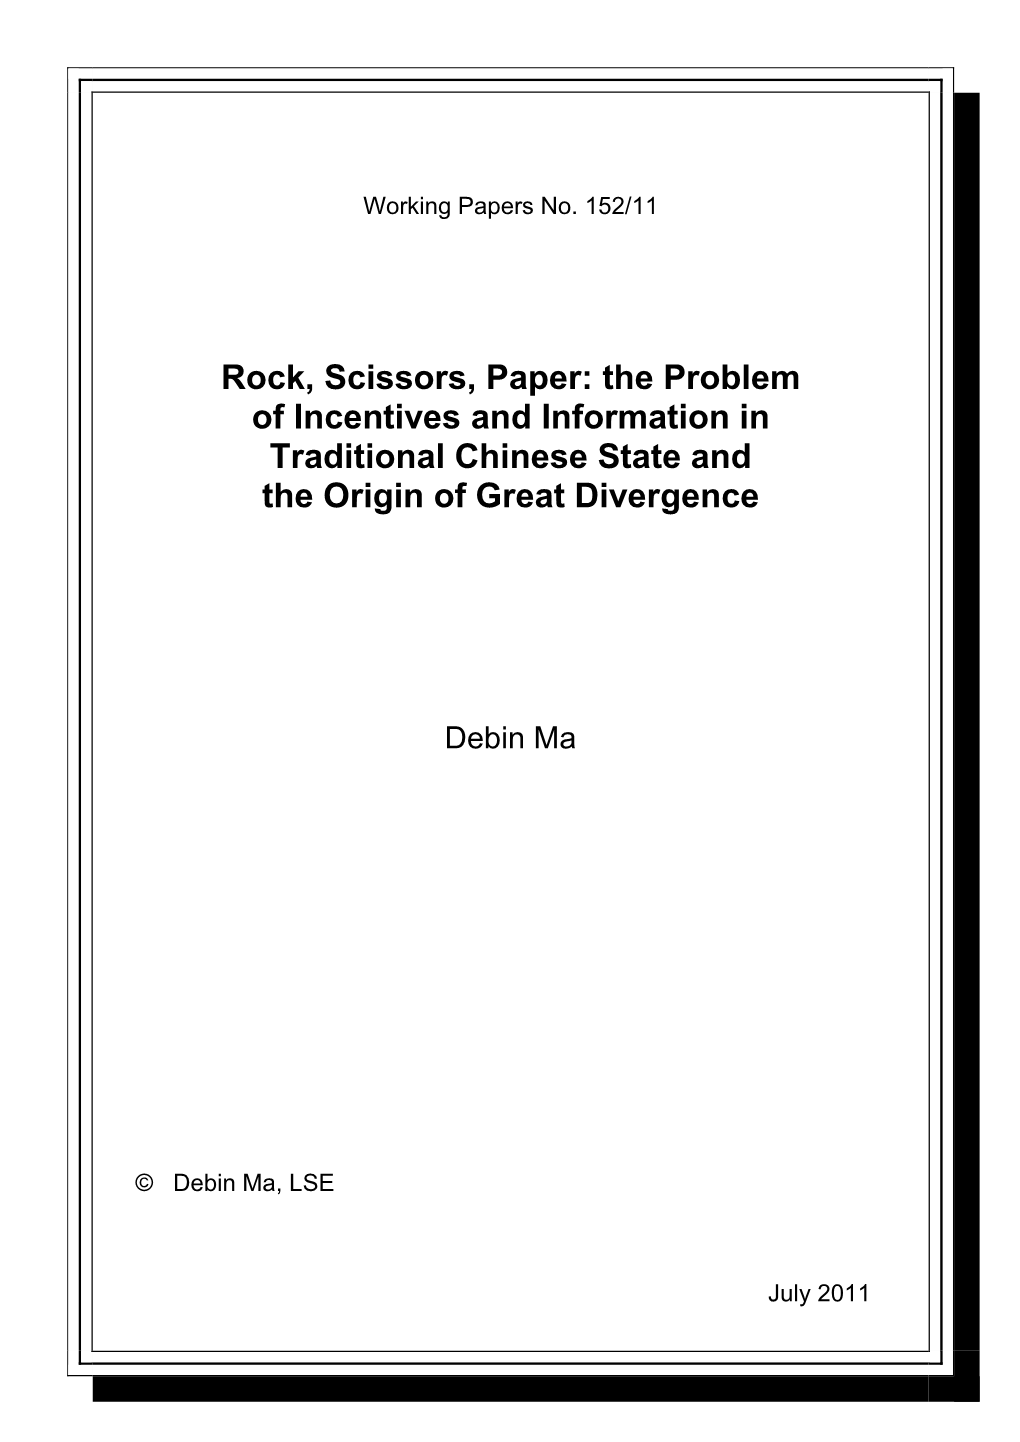 Rock, Scissors, Paper: the Problem of Incentives and Information in Traditional Chinese State and the Origin of Great Divergence